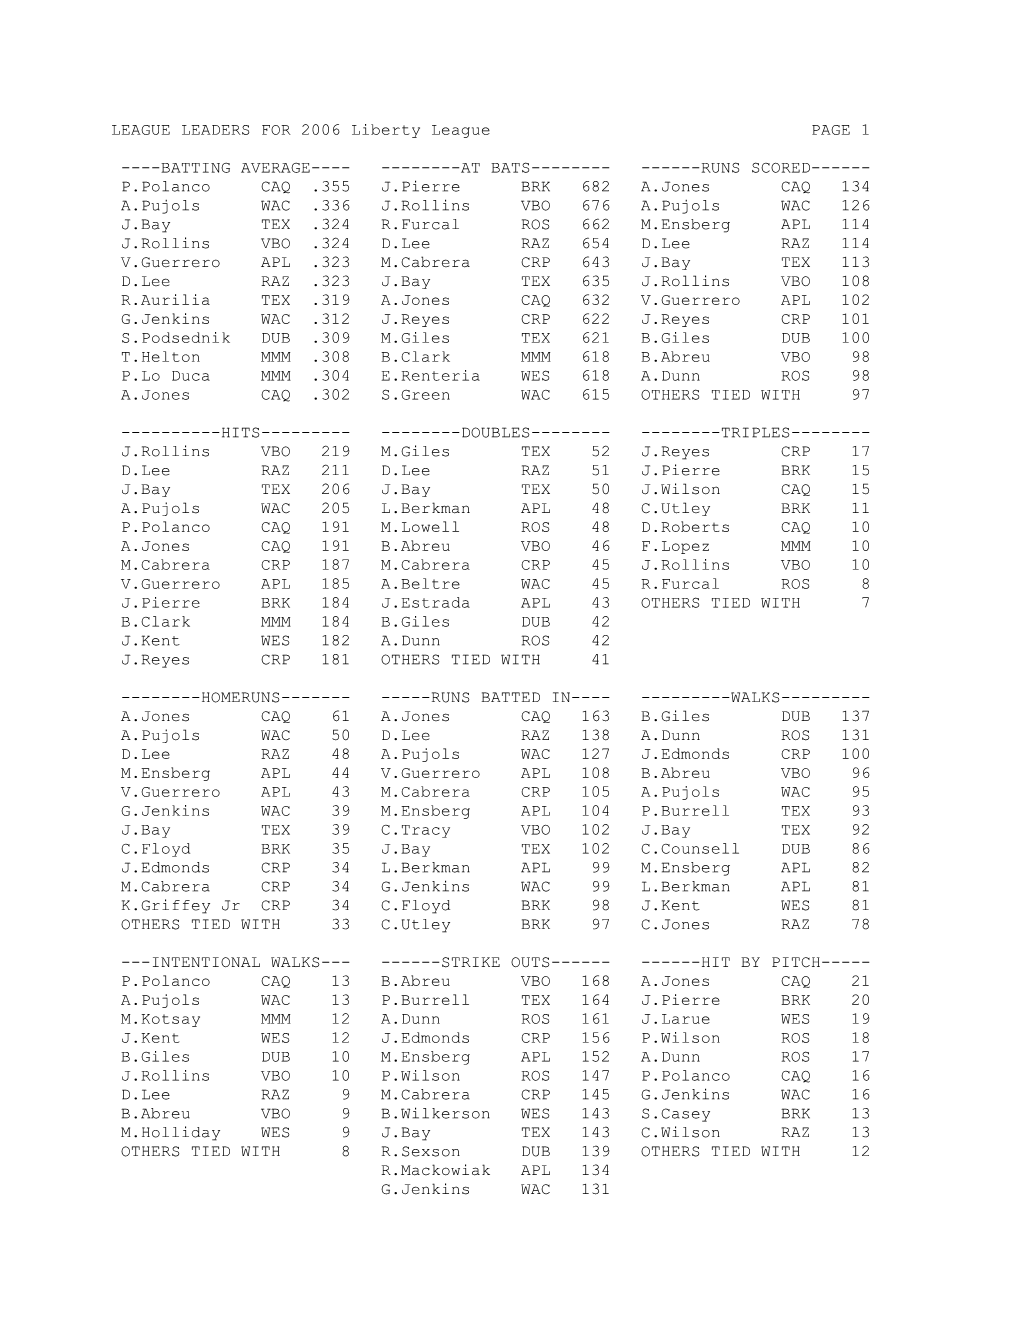 LEAGUE LEADERS for 2006 Liberty League PAGE 1